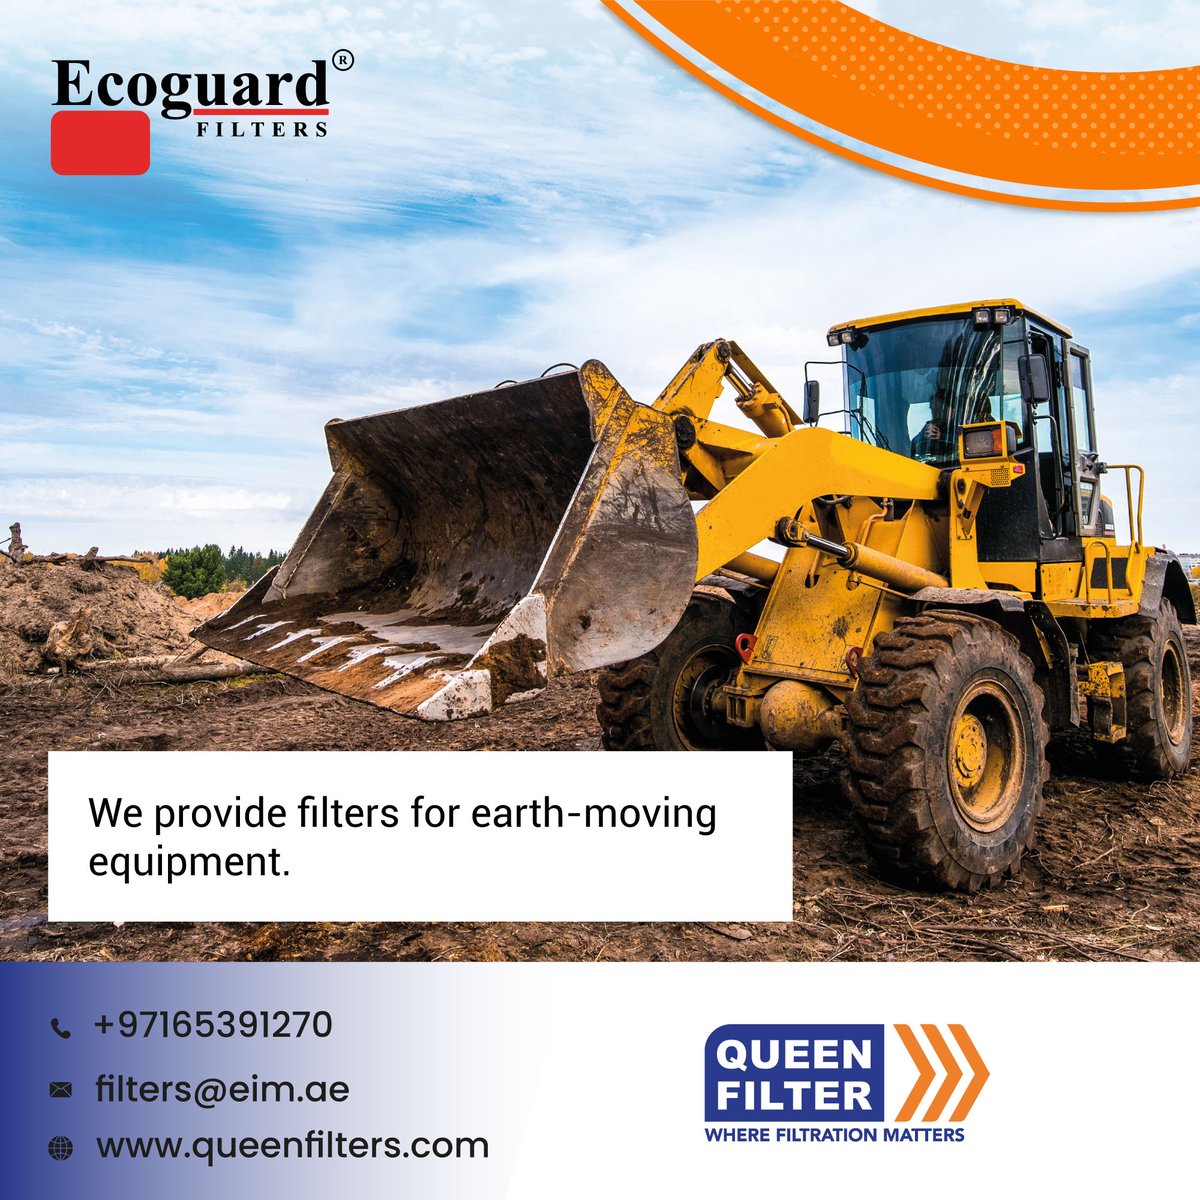 We provide filters for earth-moving
equipment.
To Get an online quotation of your required filters,
You can buy world-class filters at #queenfilters
📞 :+971 65391270
✉ : filters@eim.ae

 #fuelfilters #lubefilters #airfilters #hydraulicsfilters
#ecoguardfilters